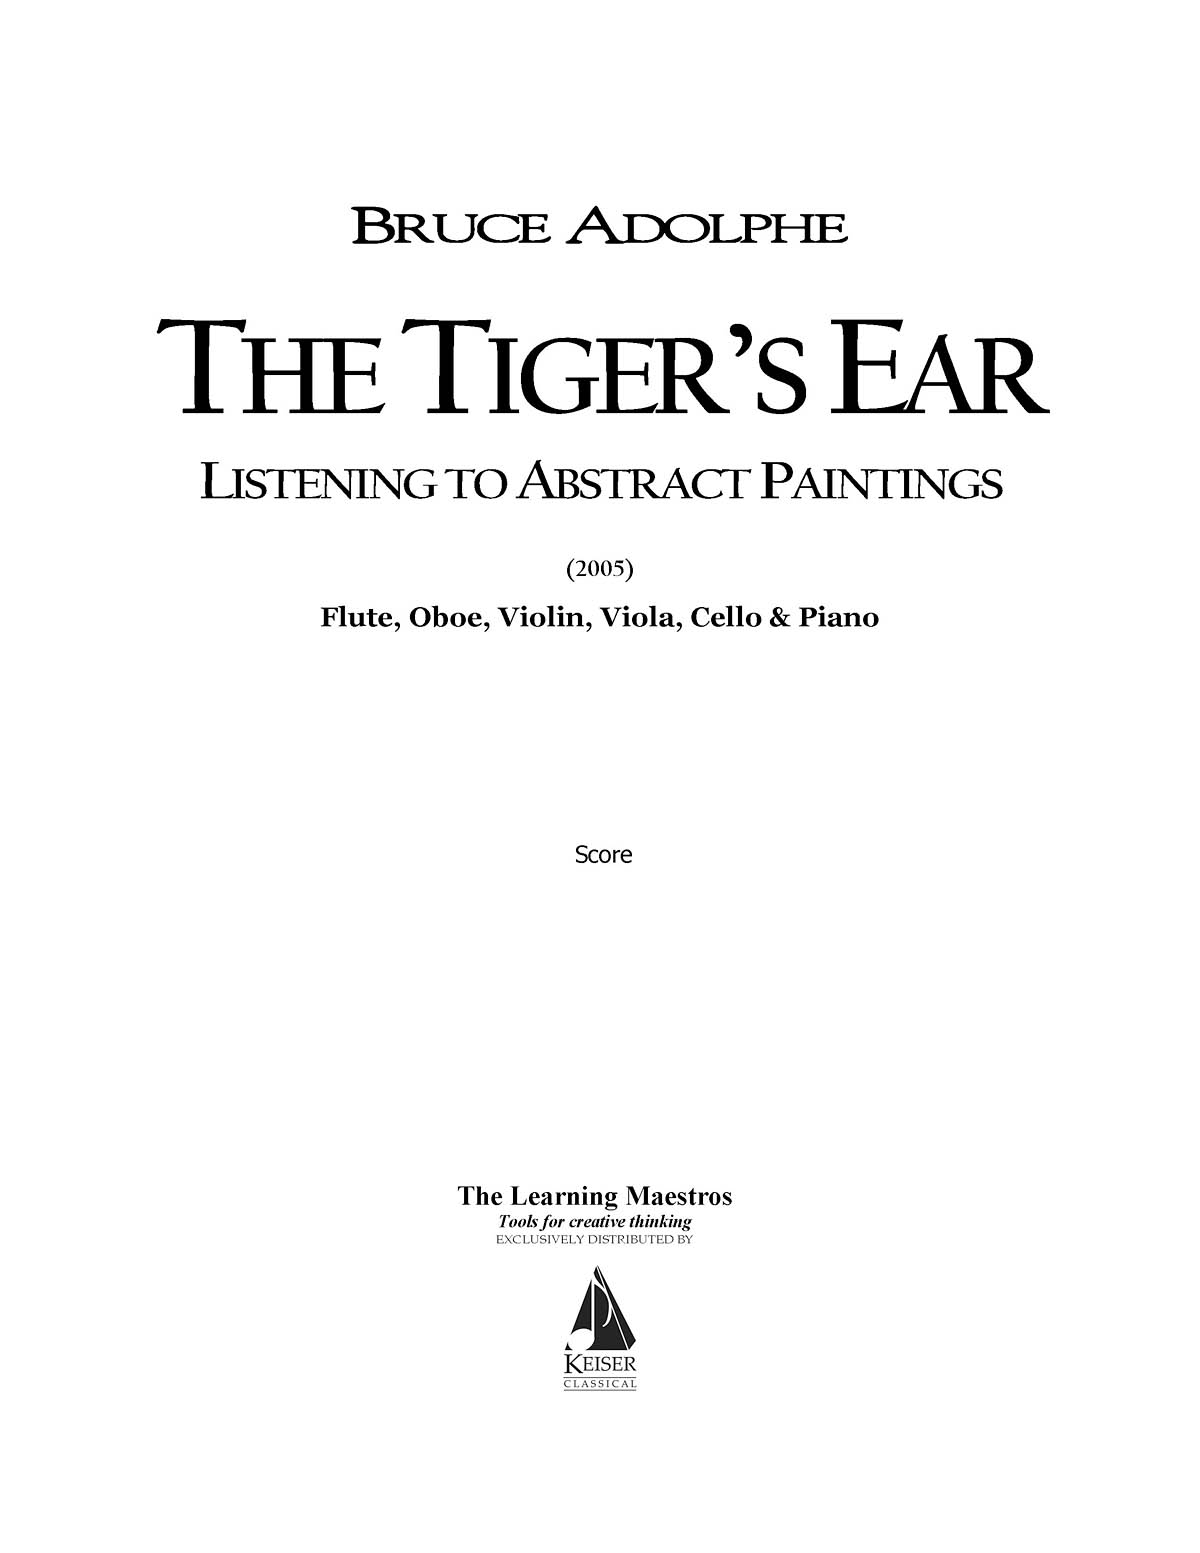 The Tiger's Ear: Listening to Abstract Paintings